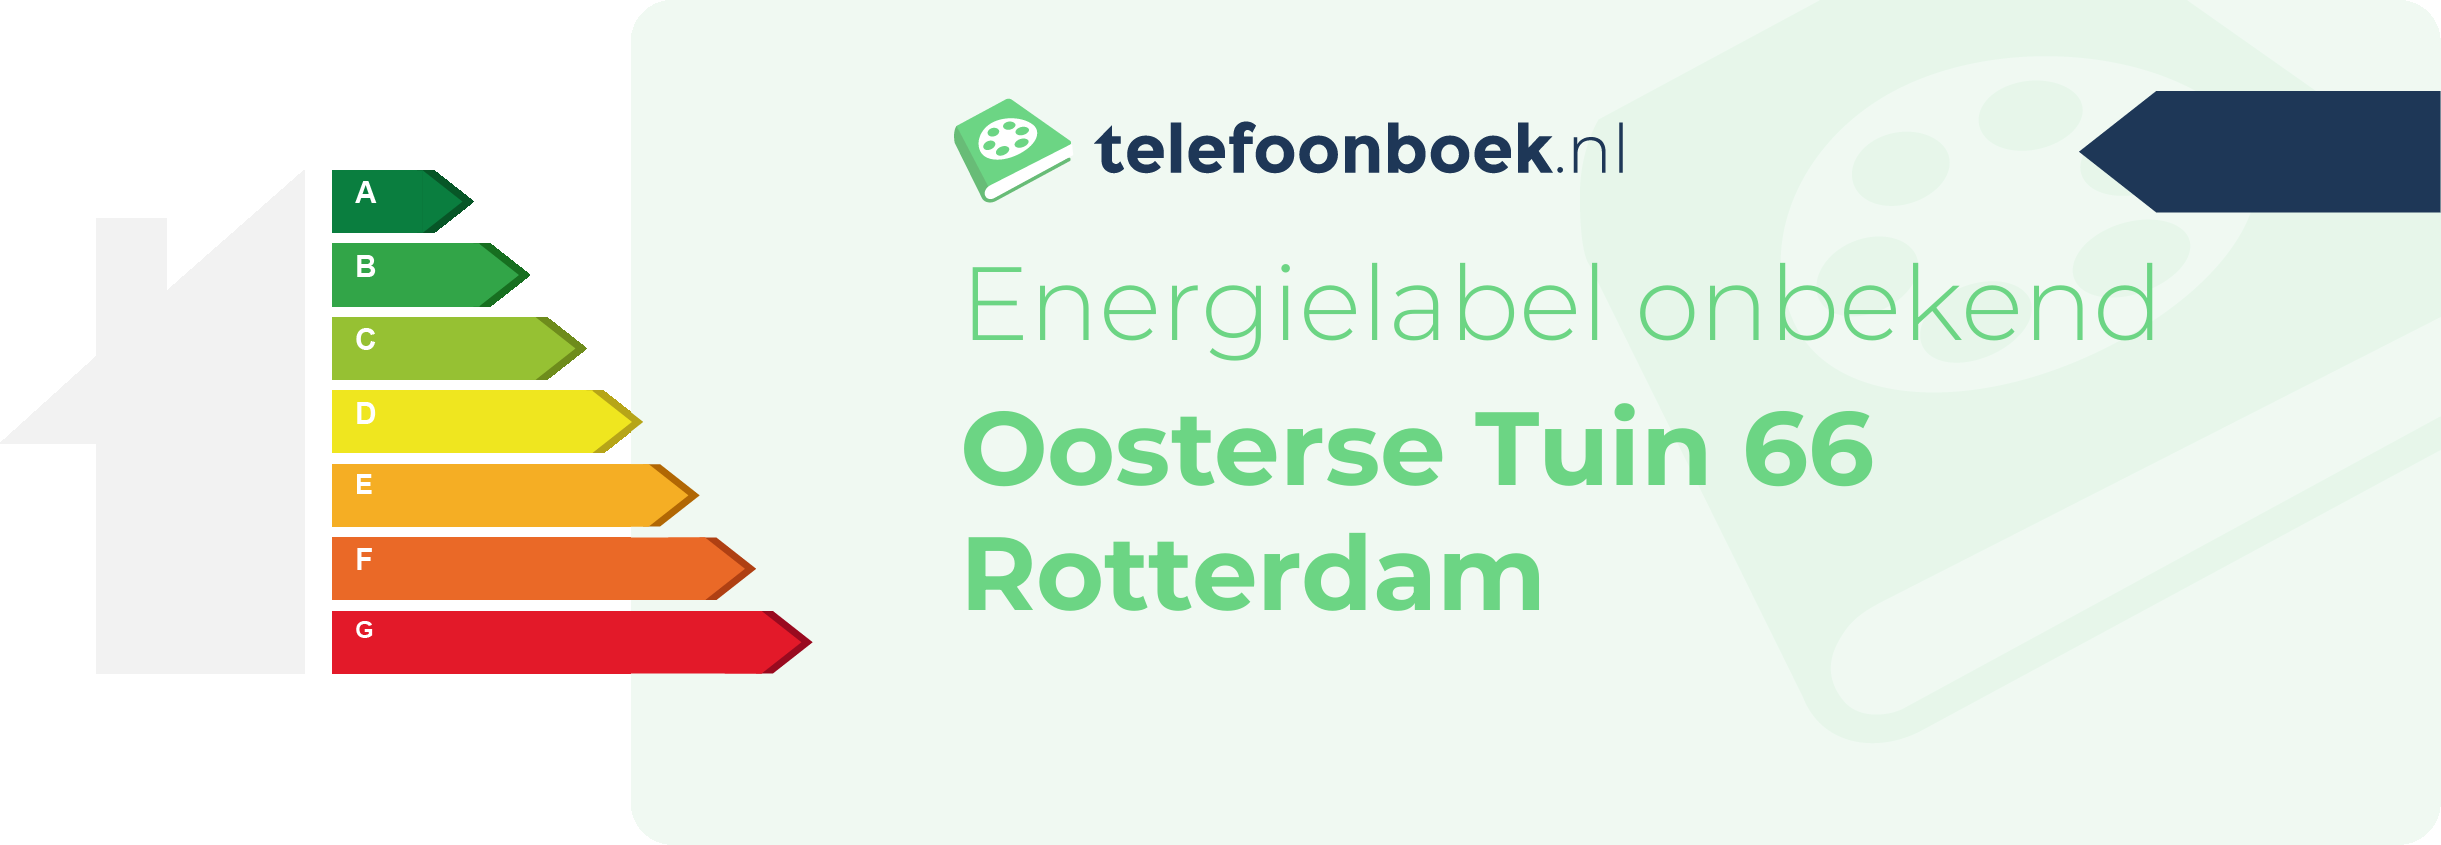 Energielabel Oosterse Tuin 66 Rotterdam